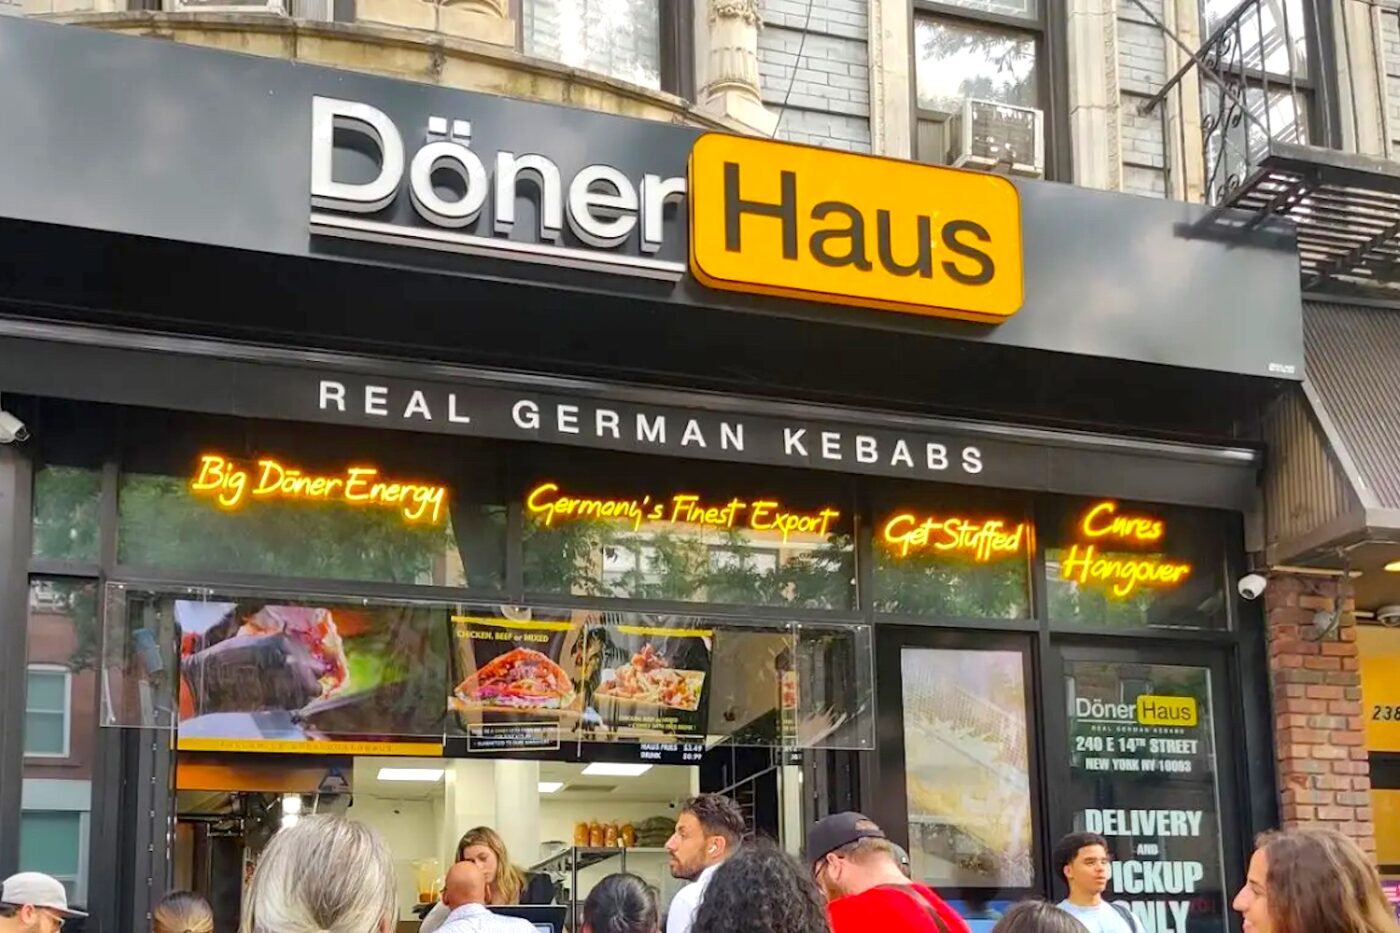 New York Kebab Restaurant Sued Over Saucy Branding By Unlikely Tech Giant